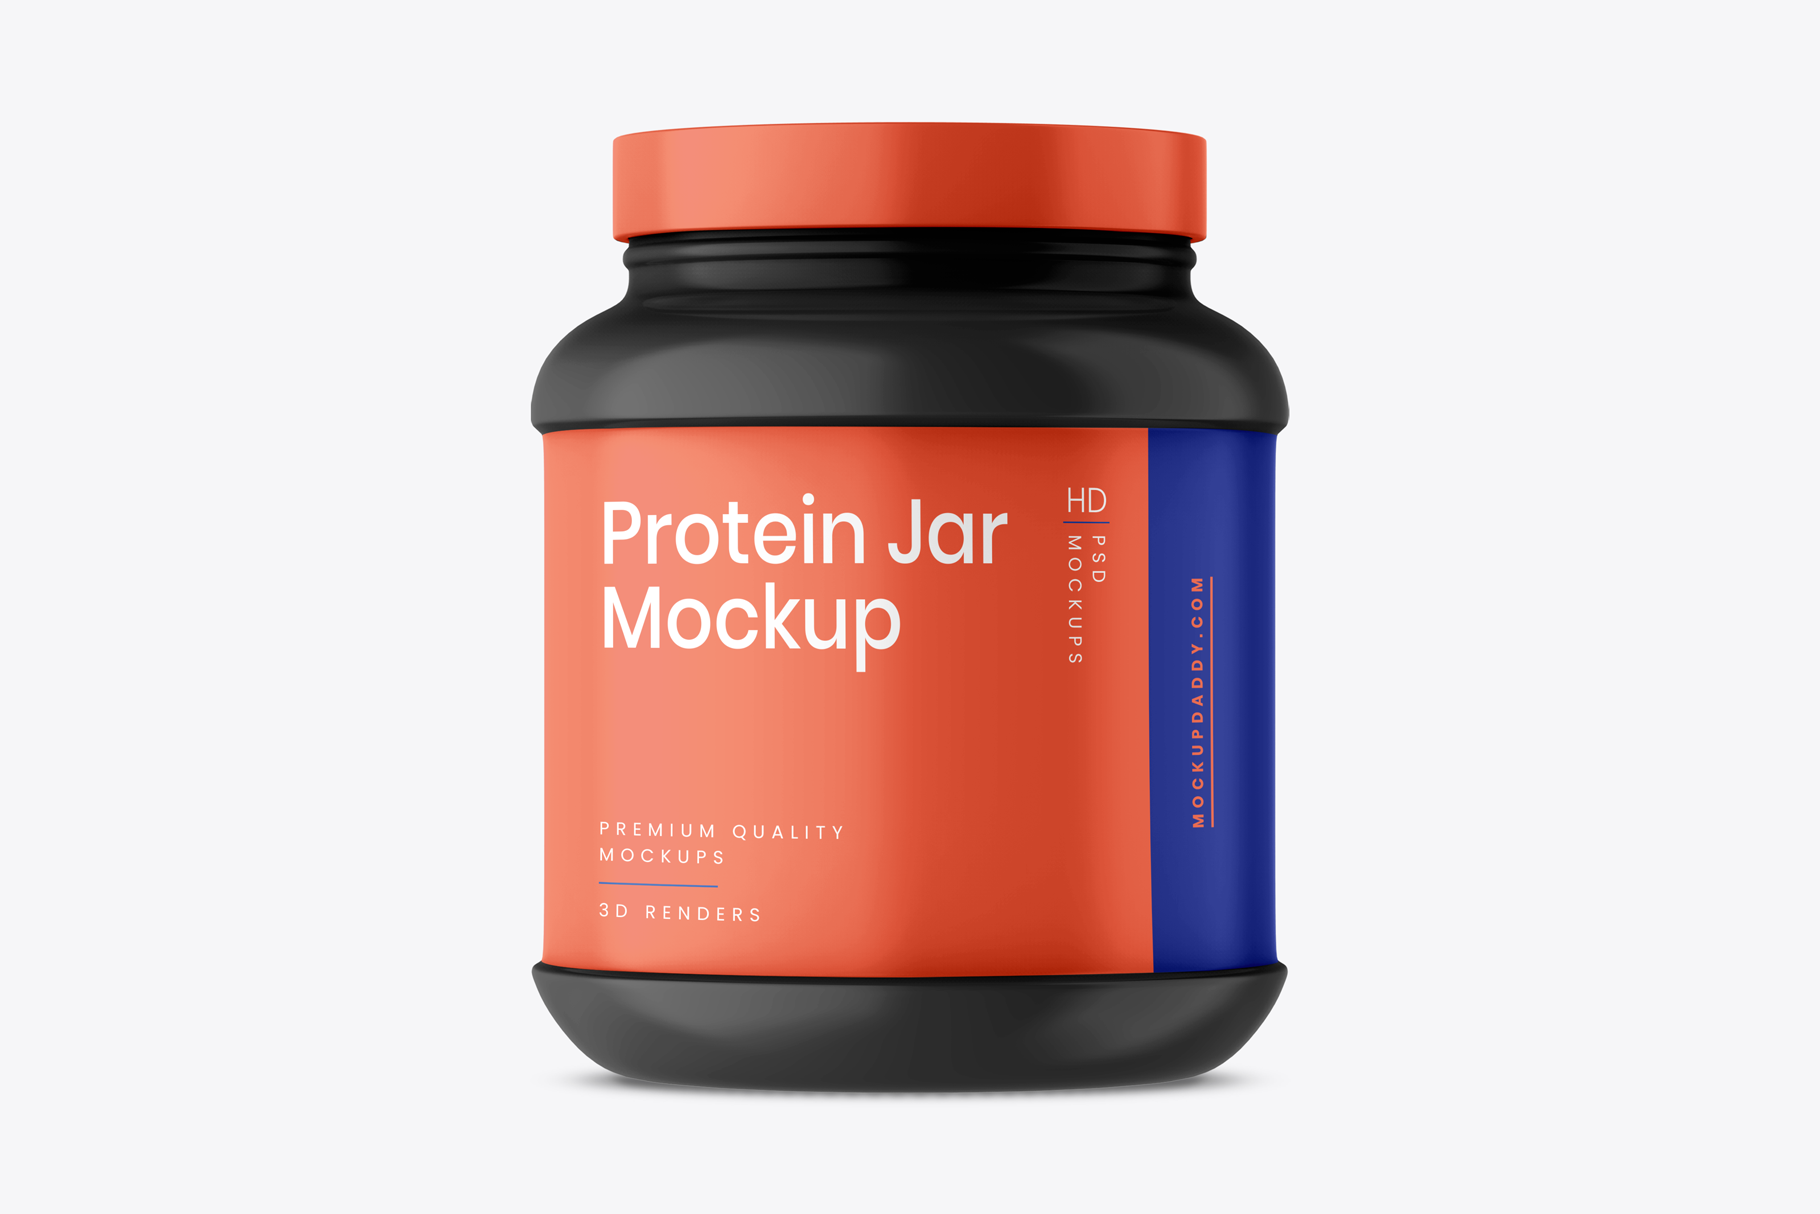 Black Protein Jar PSD Mockup with red and blue label and red lid.